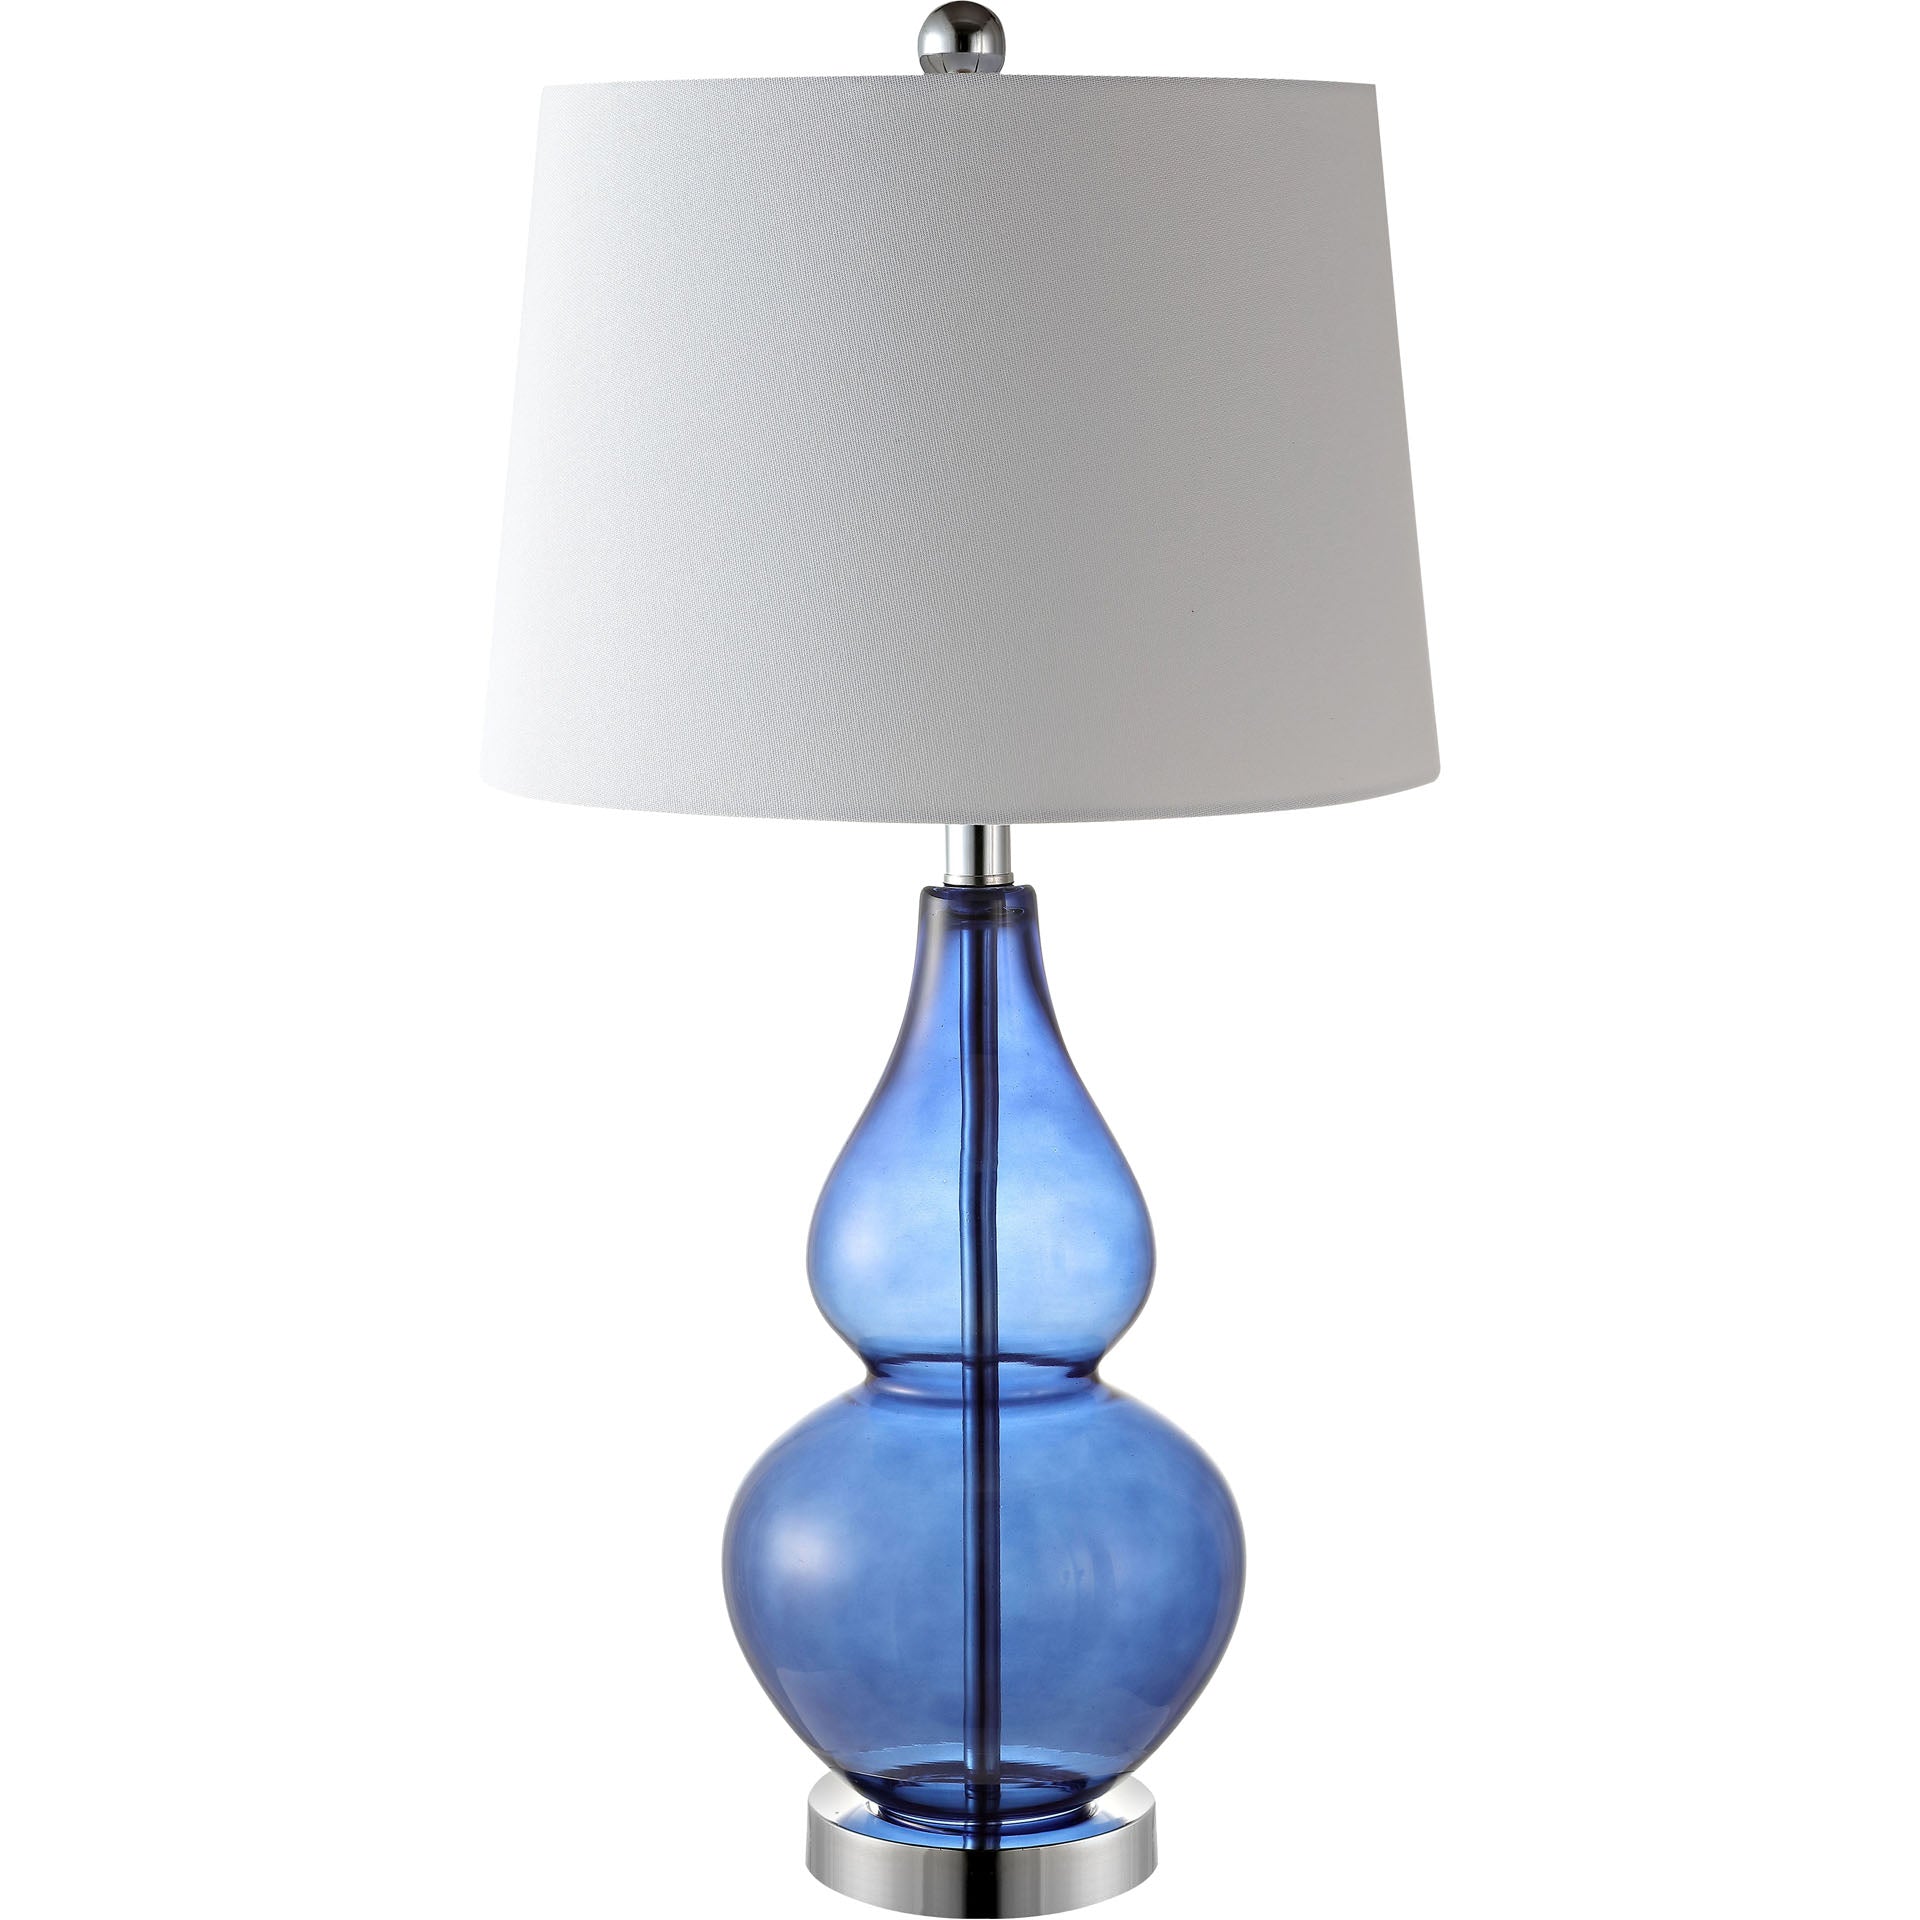 Fredio Table Lamps Blue/Chrome (Set of 2)